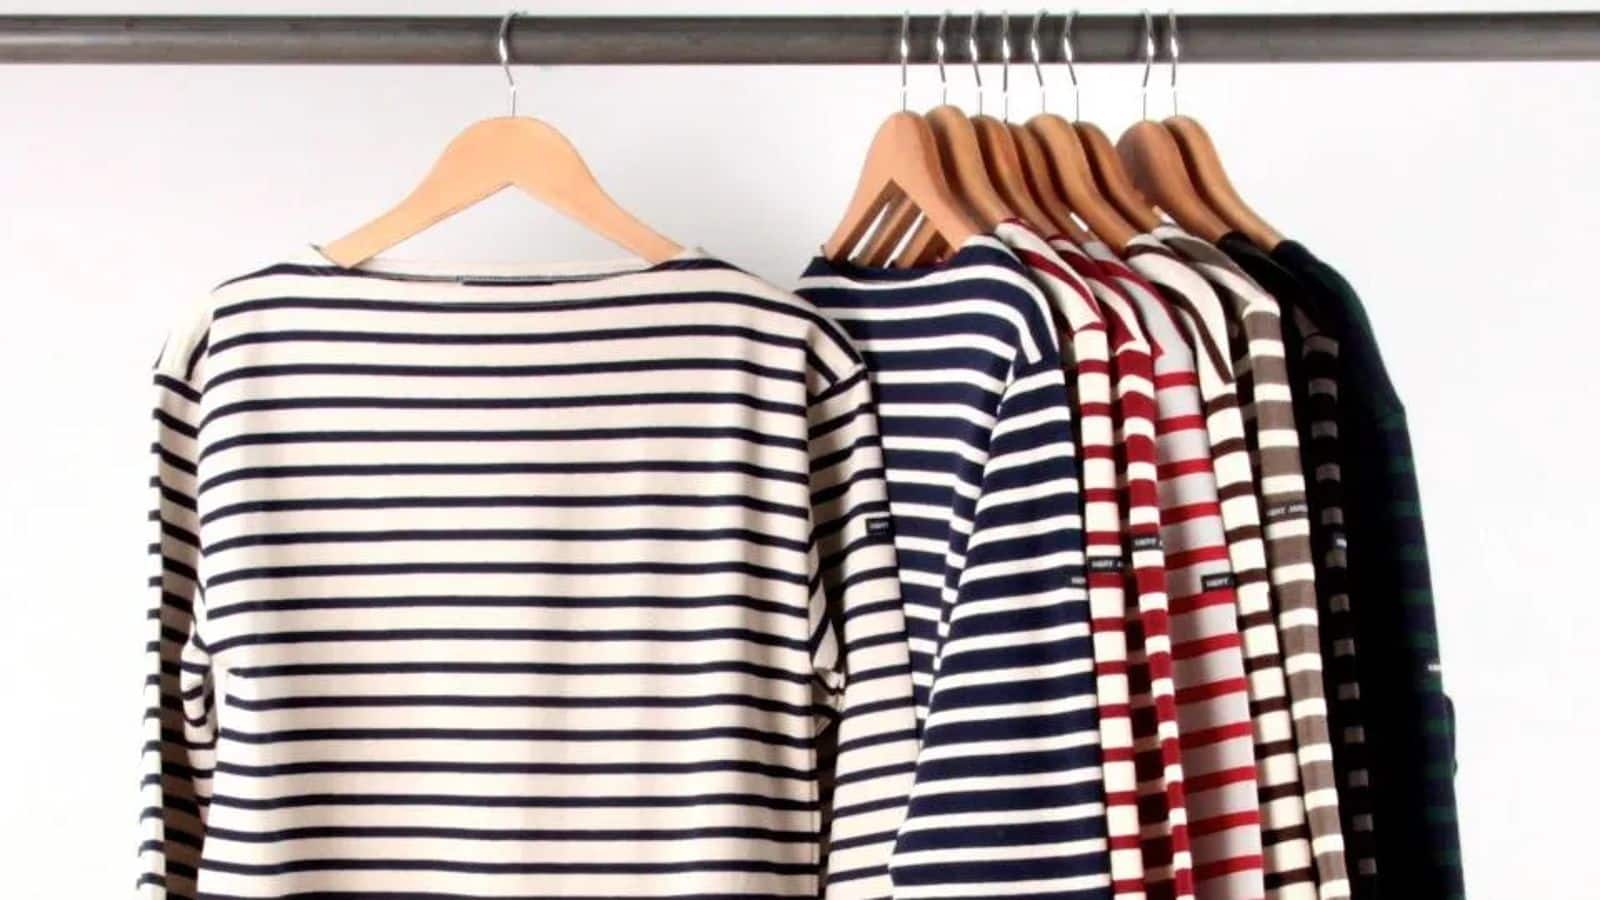 Delve into the timeless appeal of Breton stripes